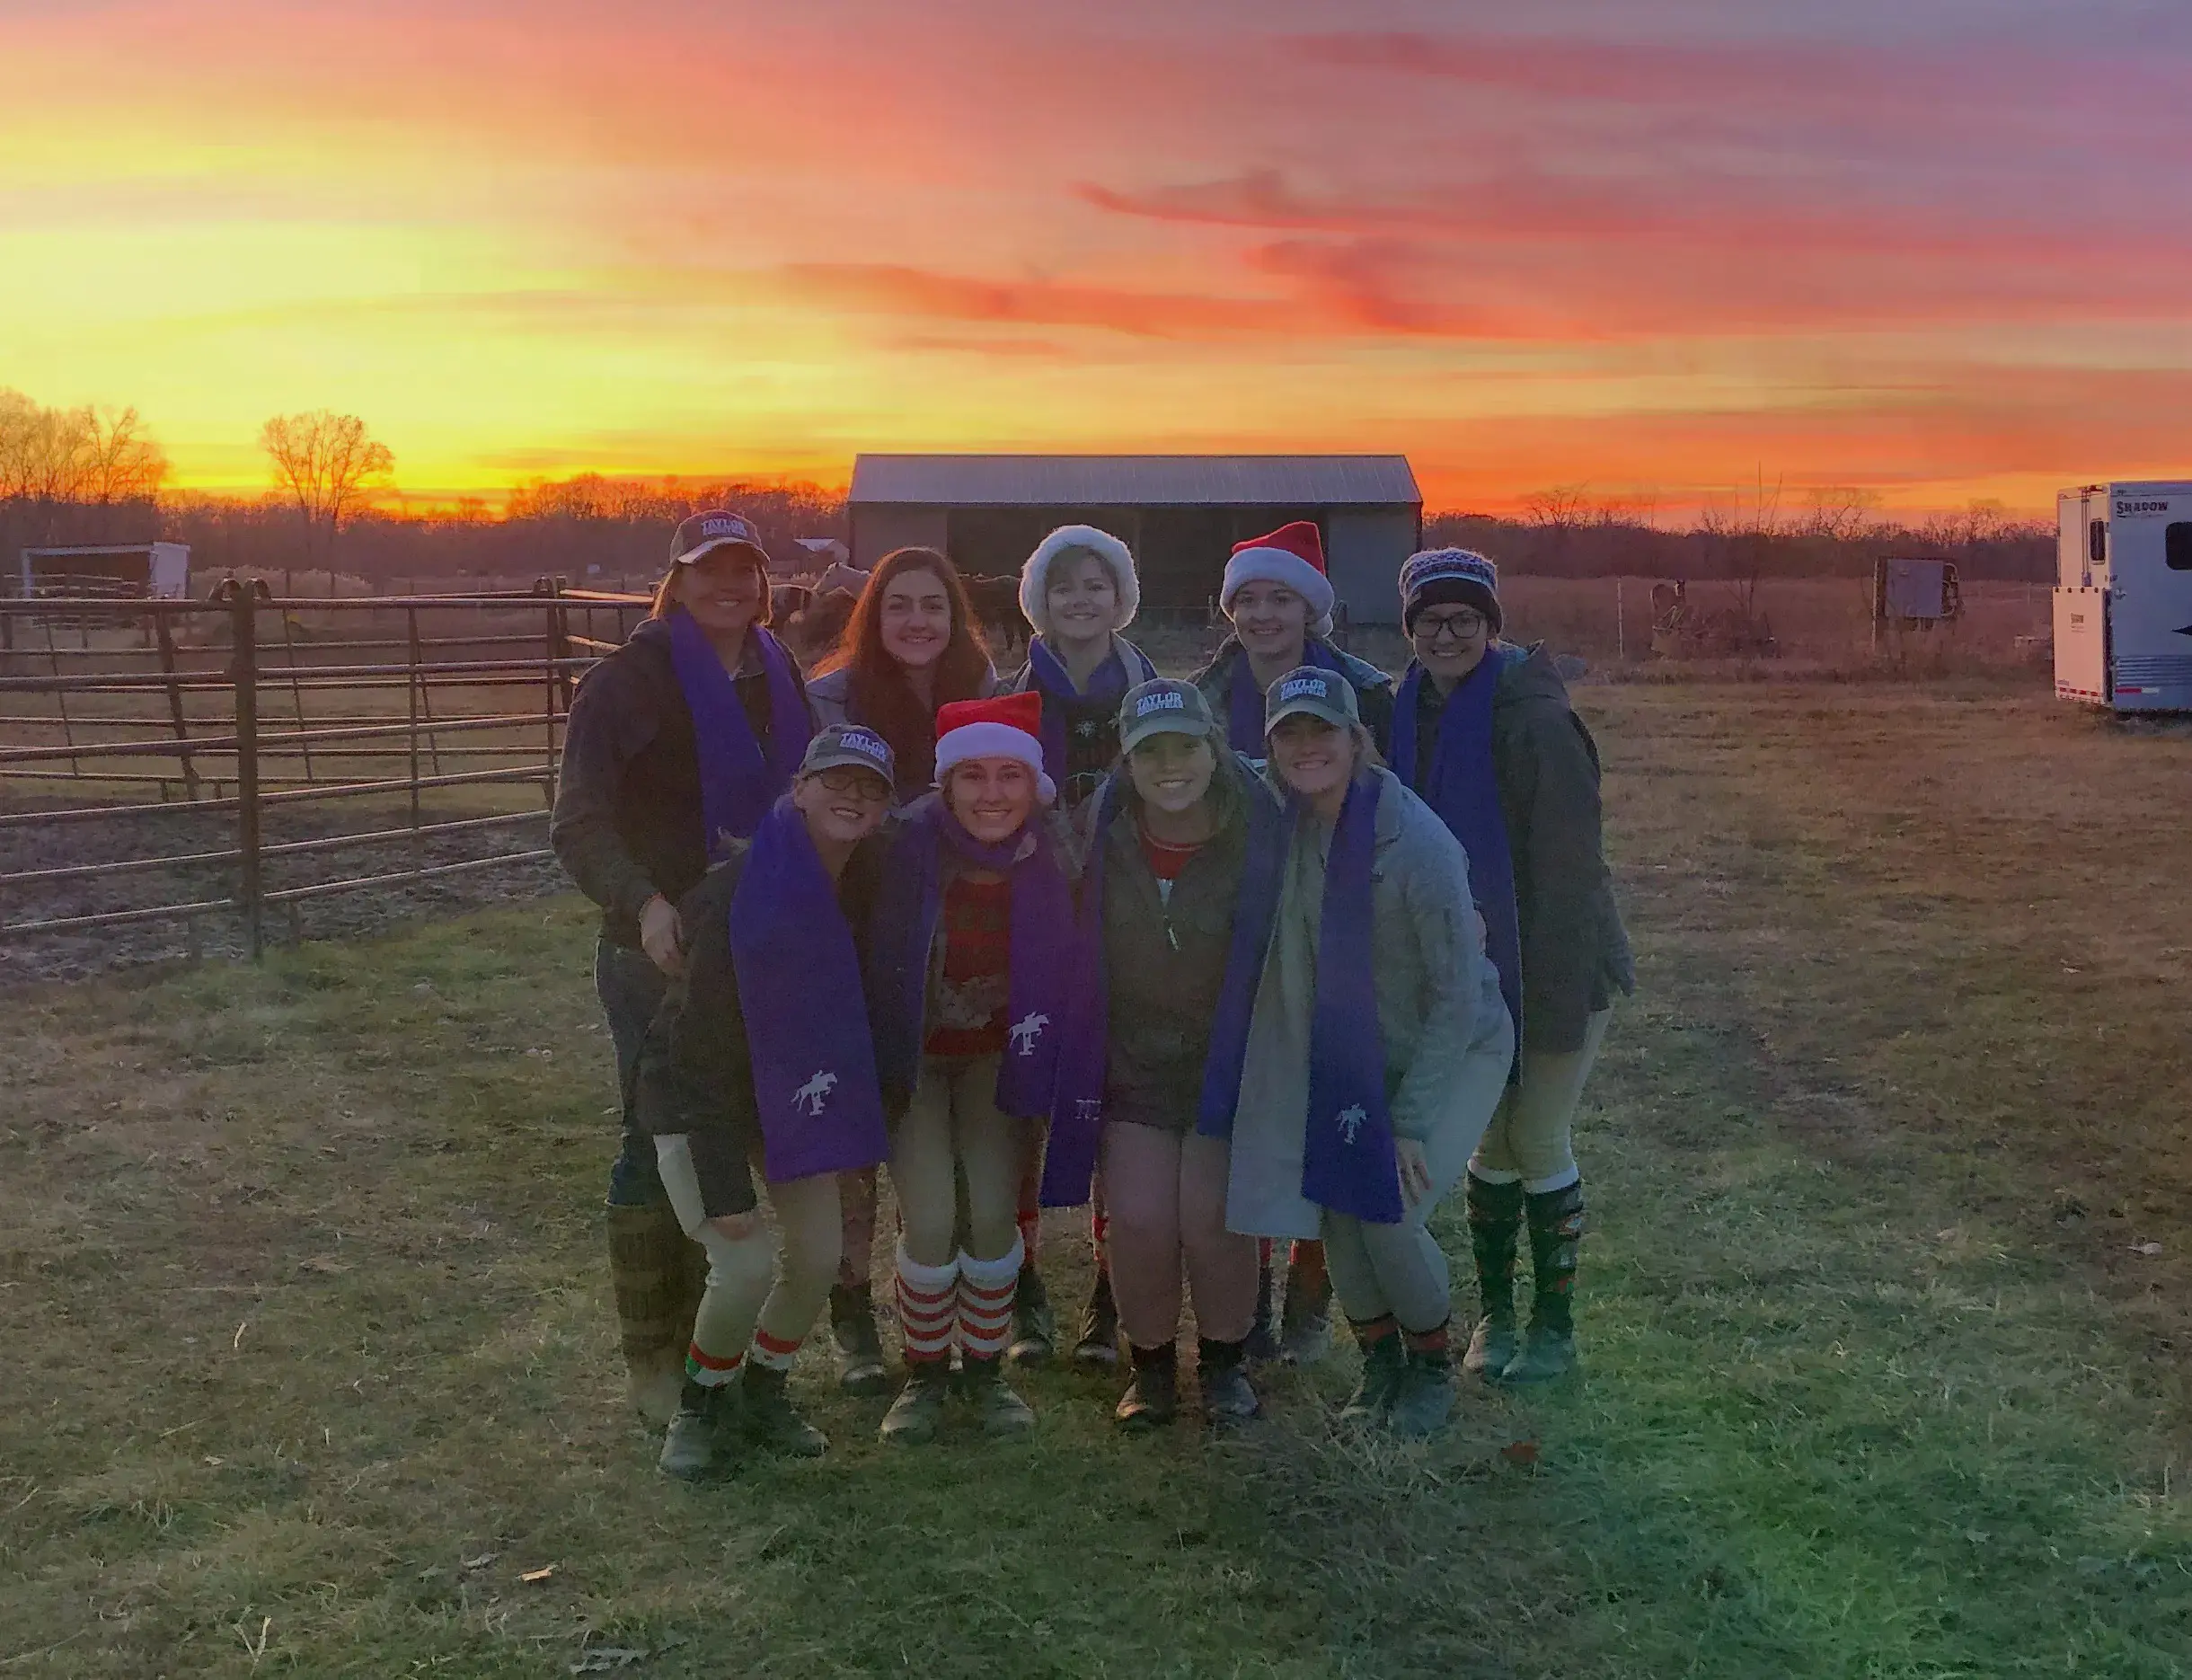 The Equestrian Team standing outside at dusk in scarves